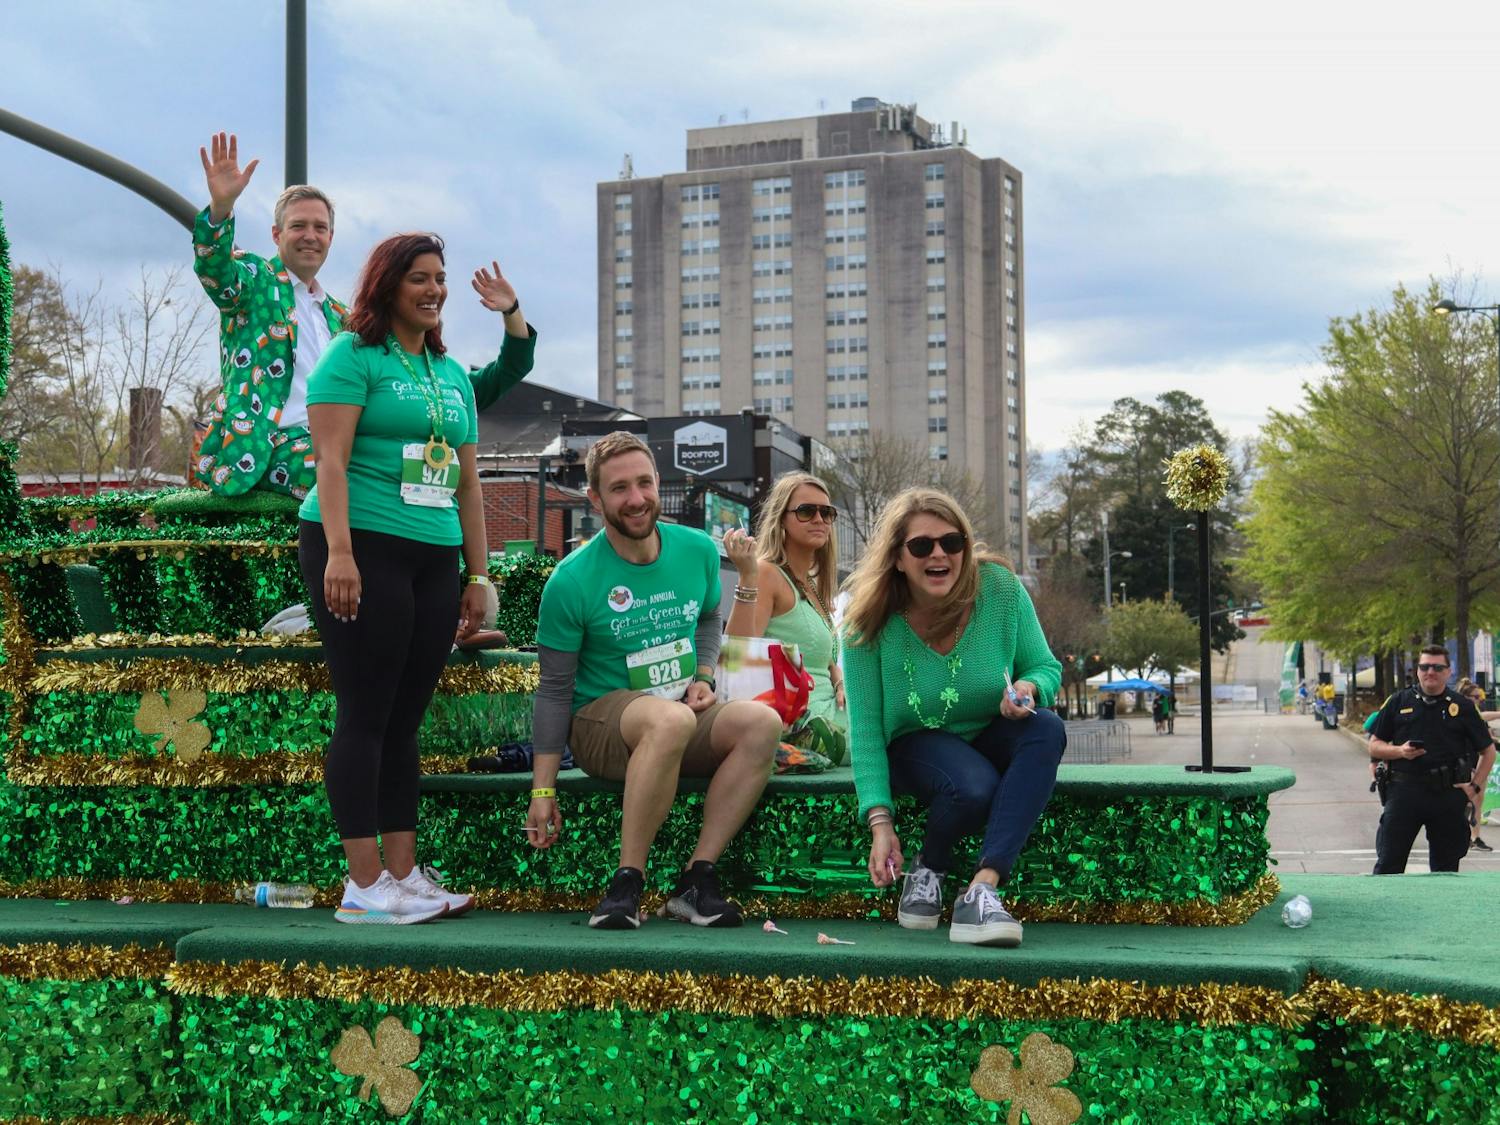 The 40th Annual St. Pat's in Five Points Parade took place this past Saturday, March 19, 2022. The festival included a variety of performances, food, and parade spectacles from colorful floats to marching band fanfare.